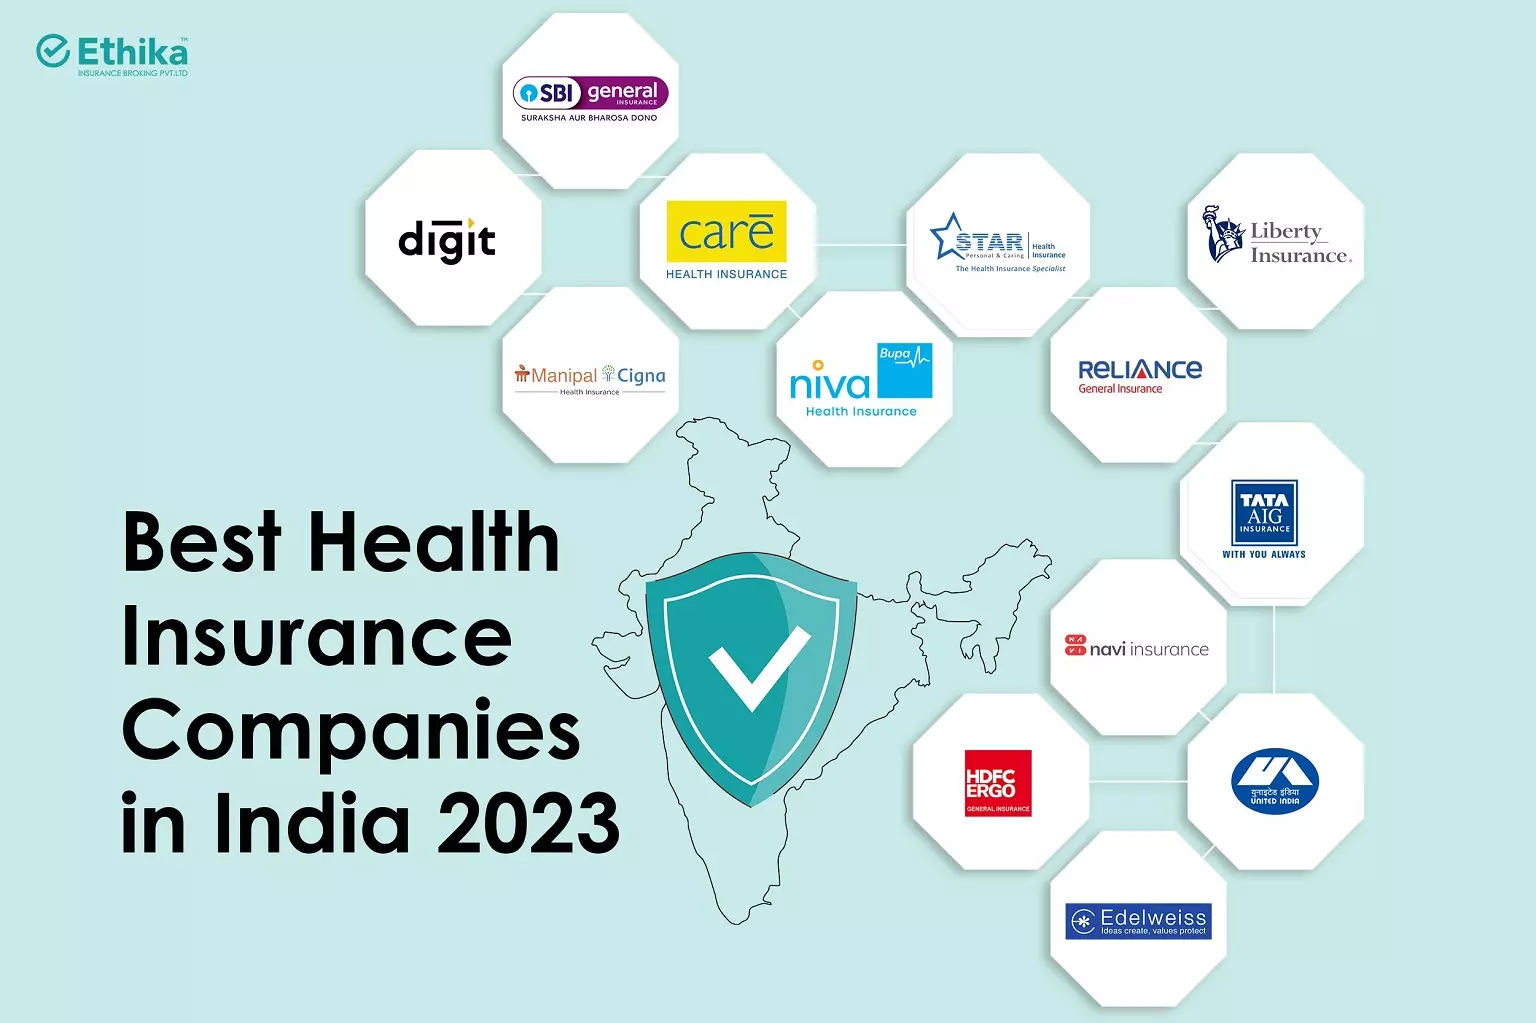 Best Health Insurance Companies in India 2023